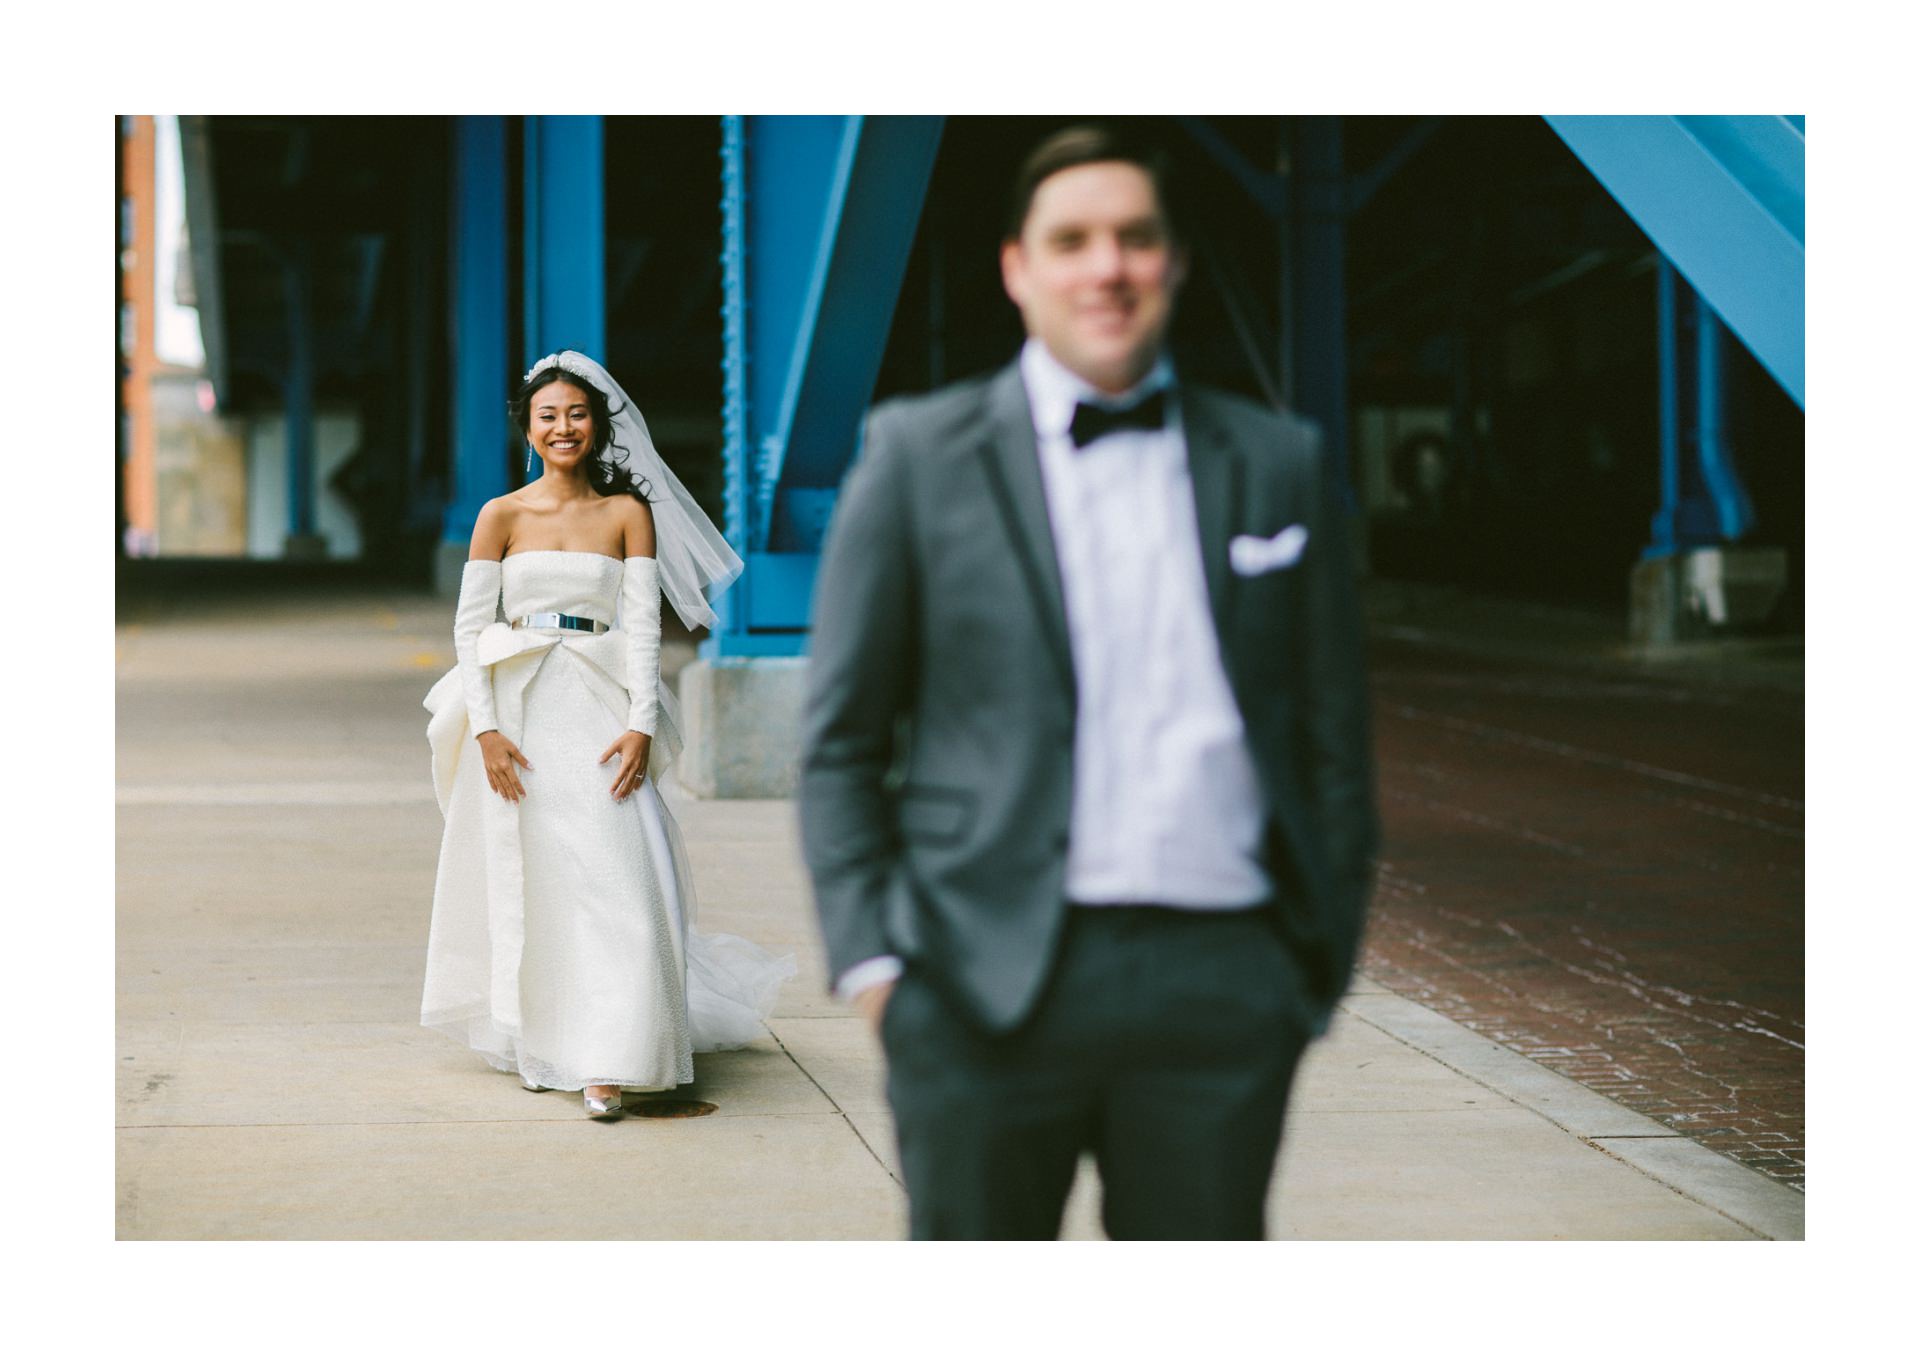 Wedding at Ernst and Young Rooftop in Downtown Cleveland 1 19.jpg